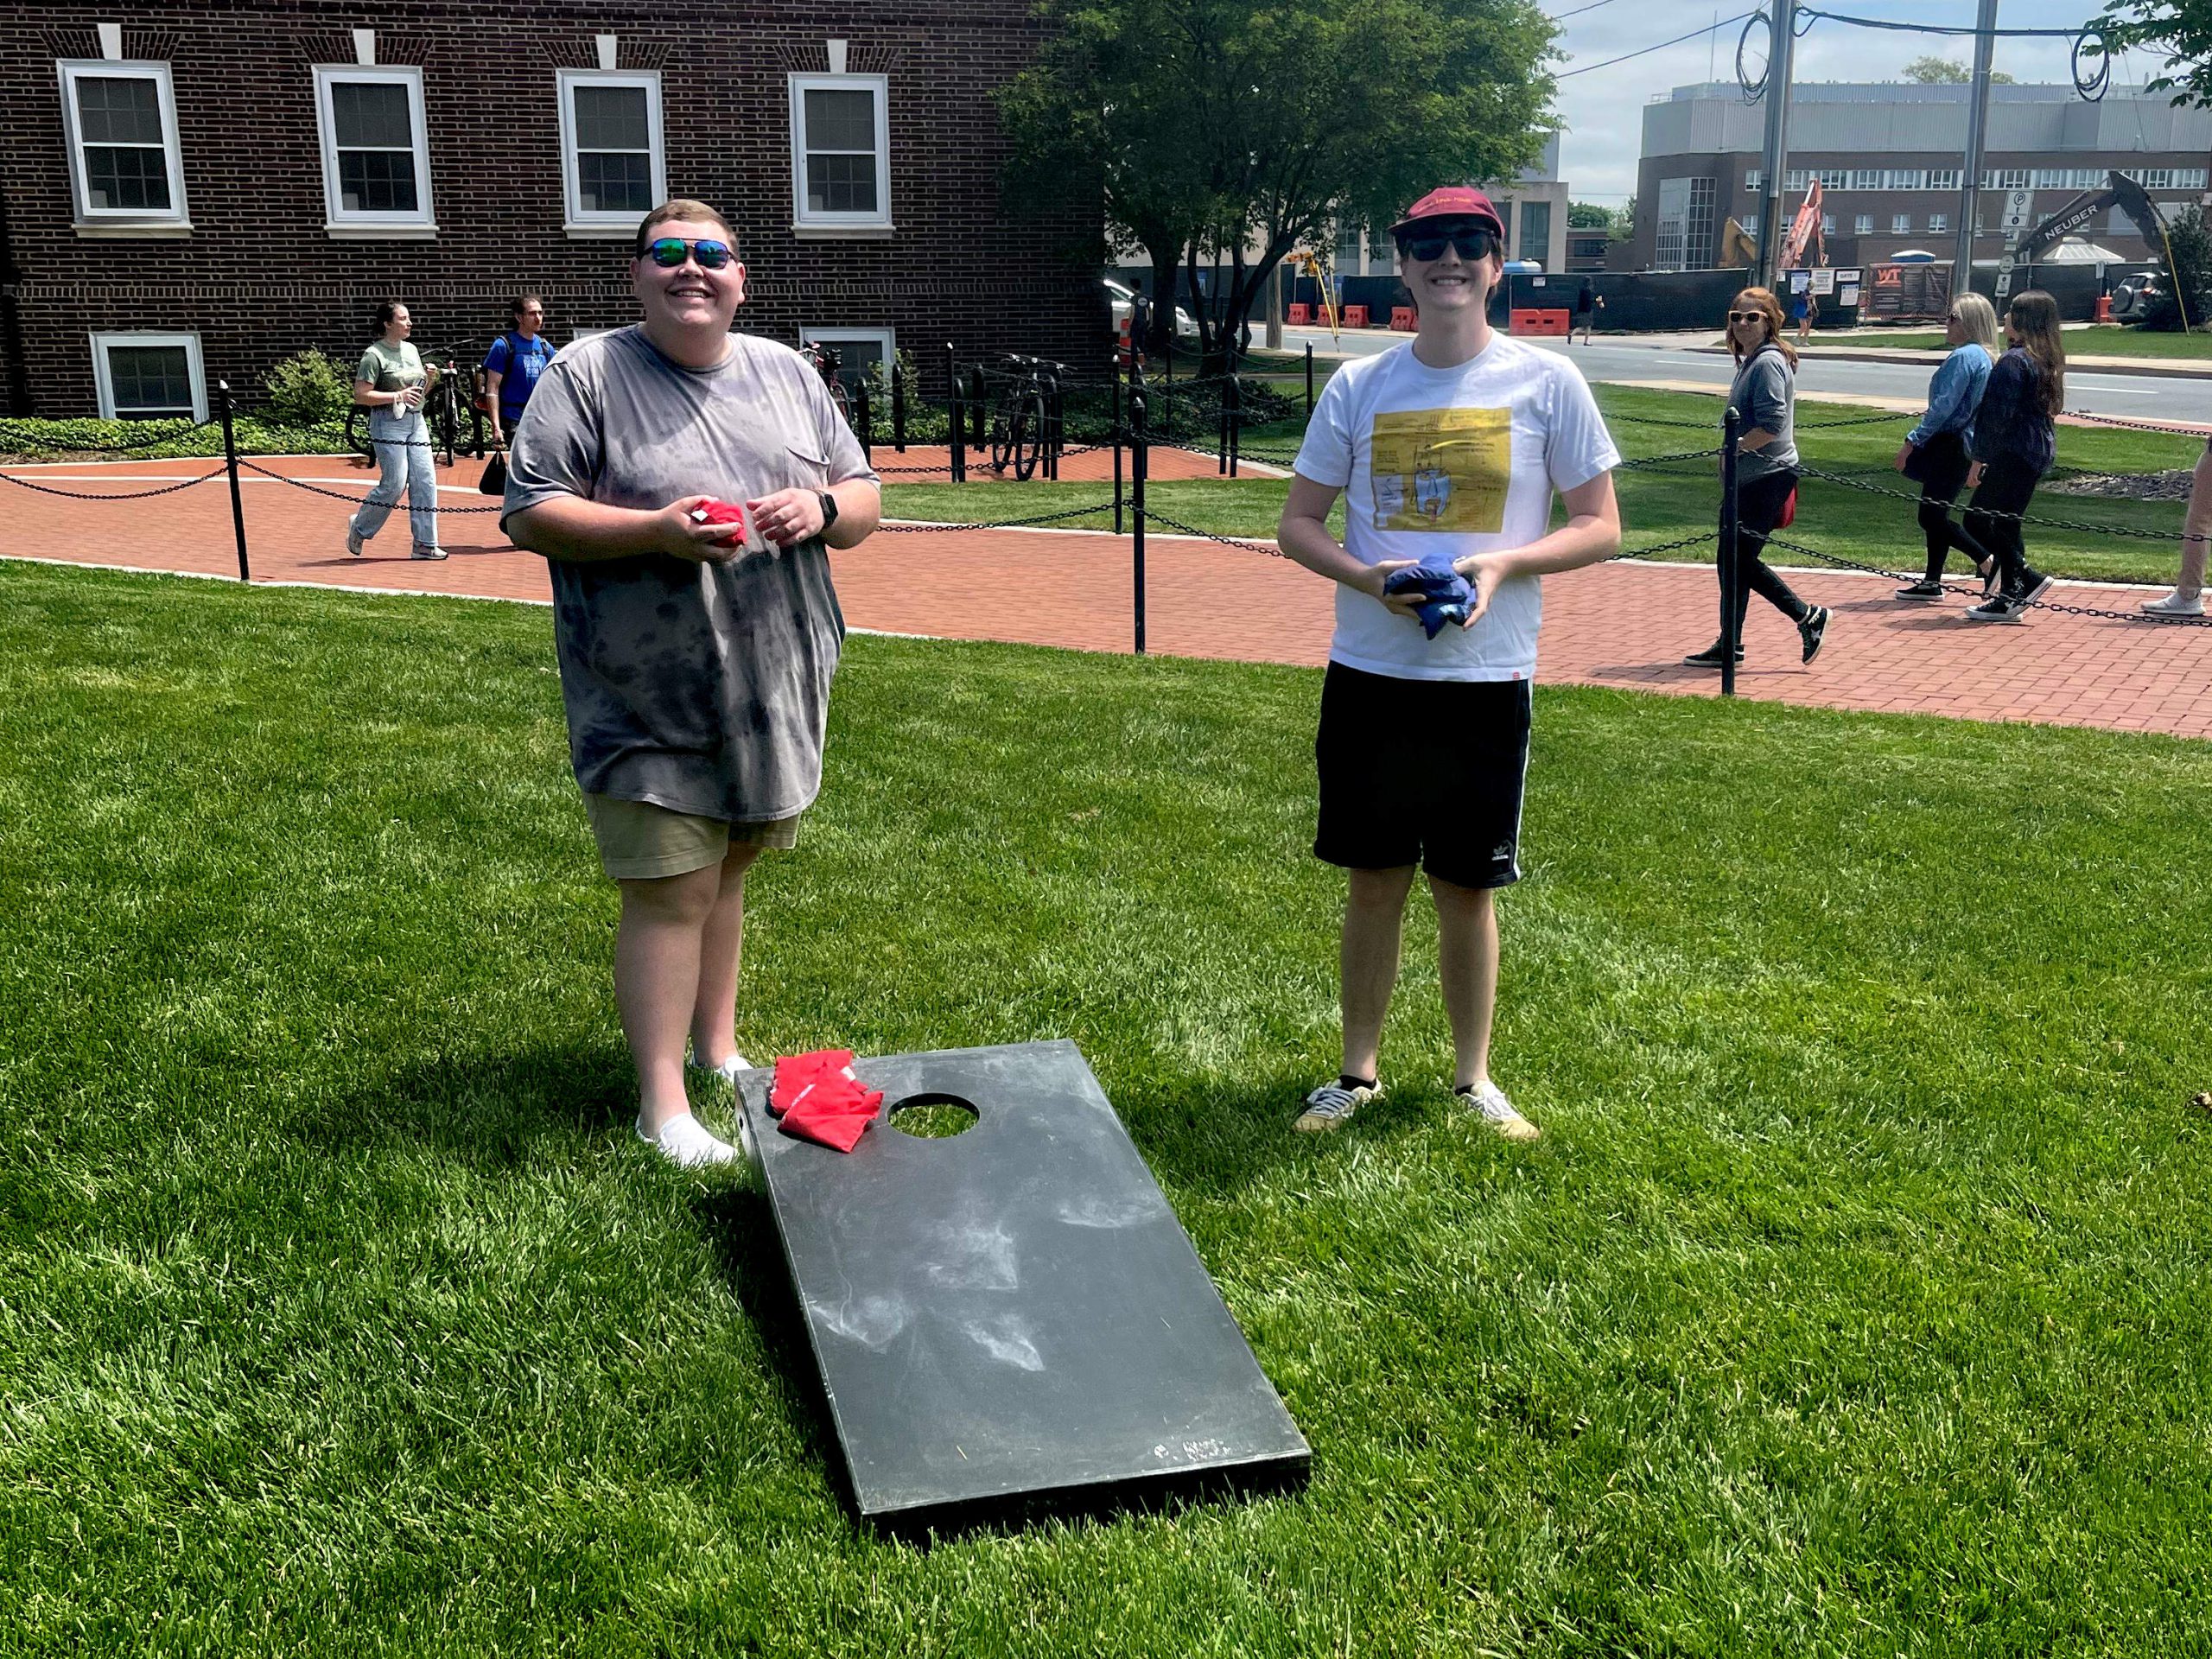 TUA members play cornhole at an event on the green.